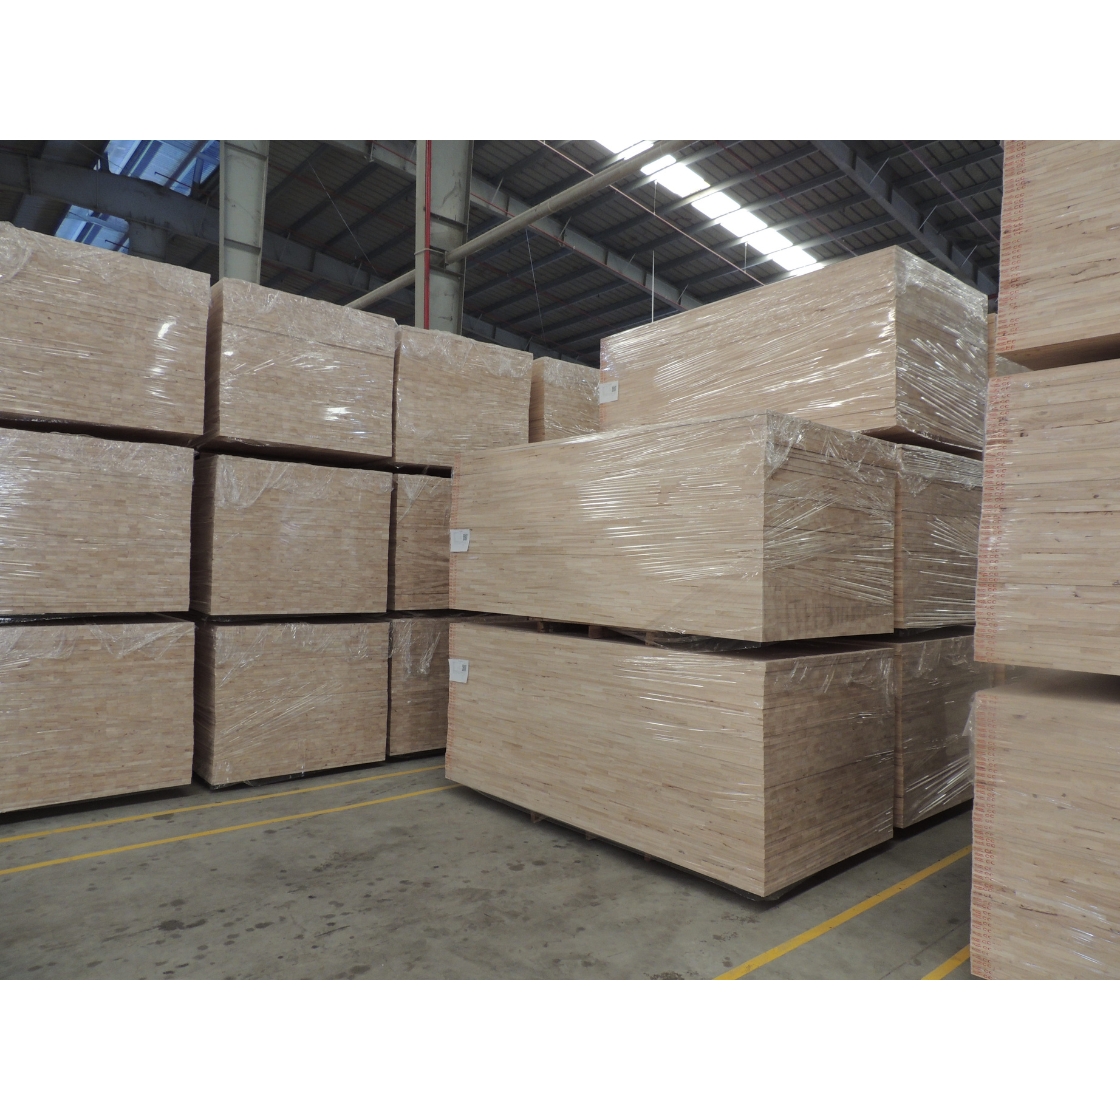 Warranty 1 Year Fast Delivery Export Indoor Furniture Fsc-Coc Customized Packaging Made In Vietnam Manufacturer